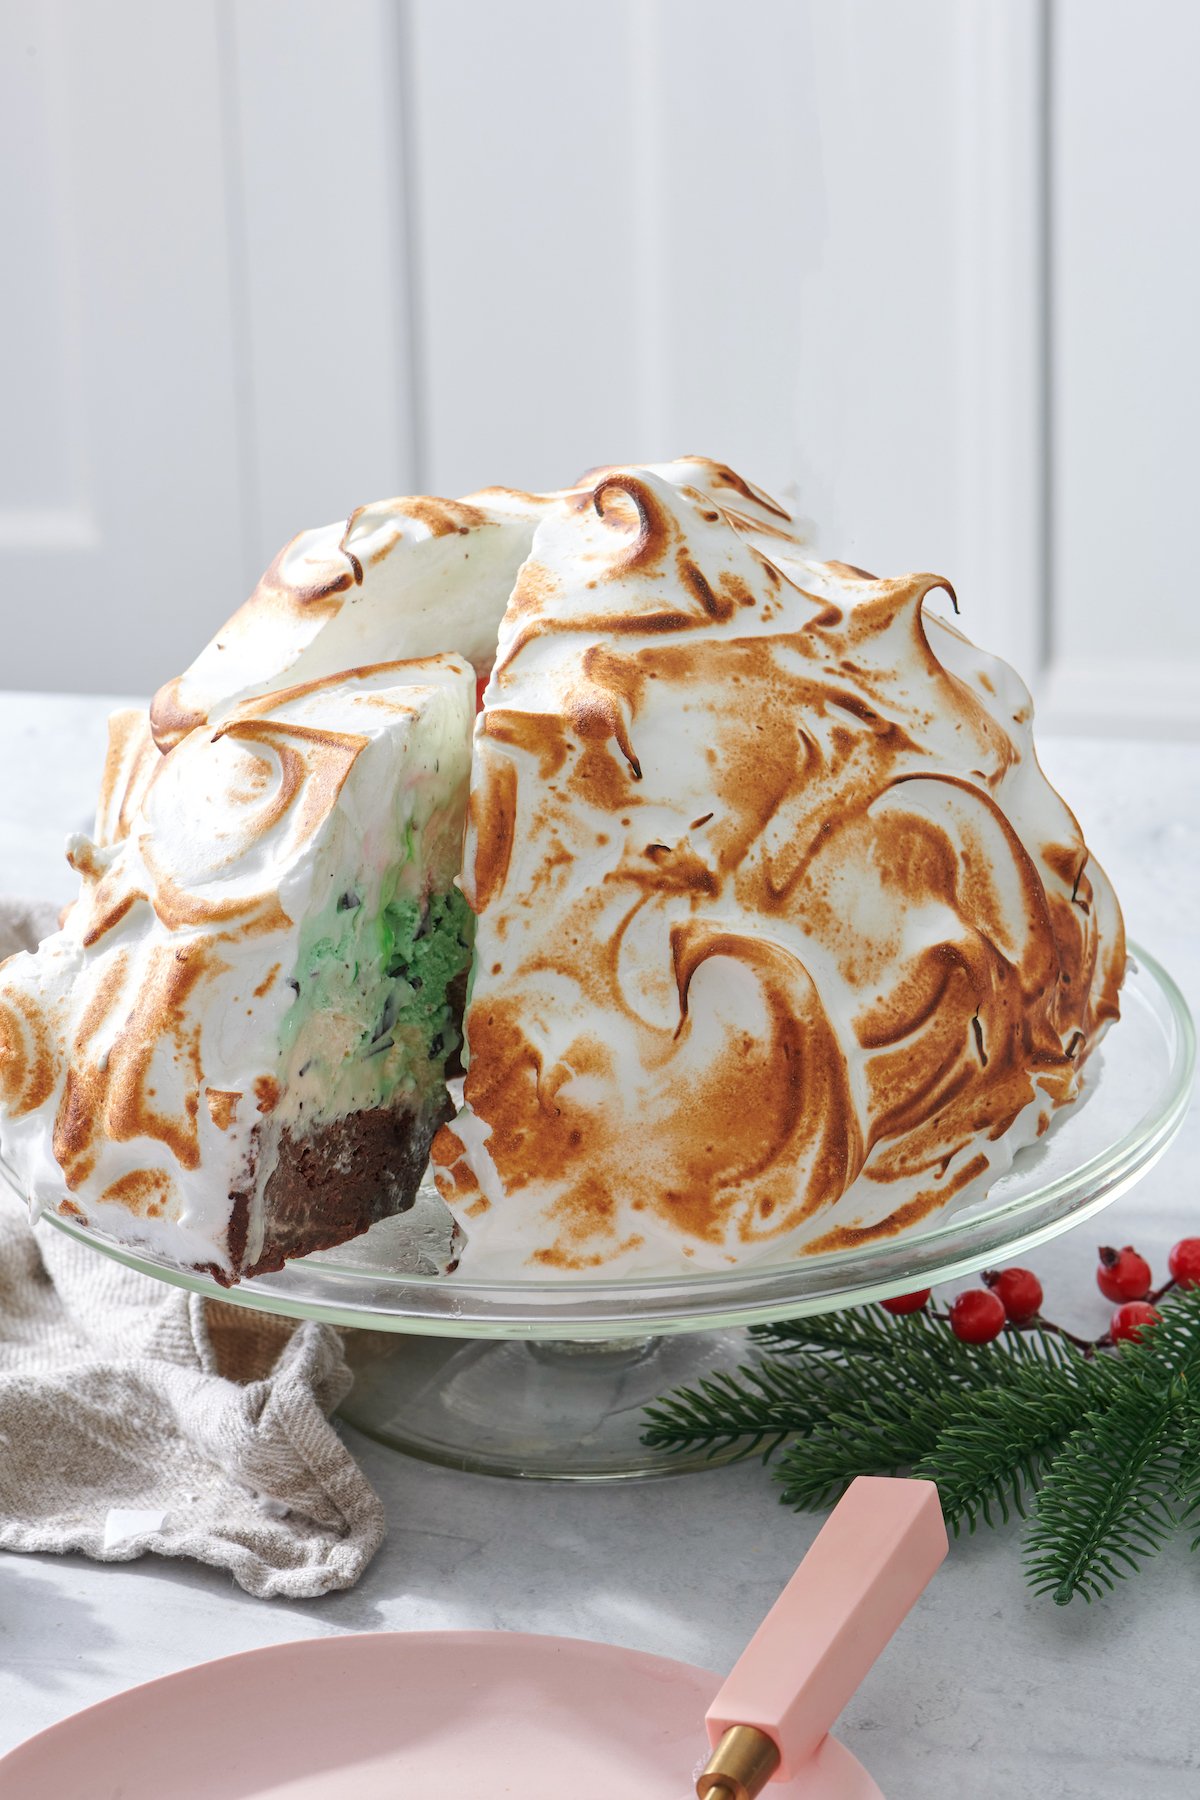 Removing a slice from Holiday Baked Alaska.